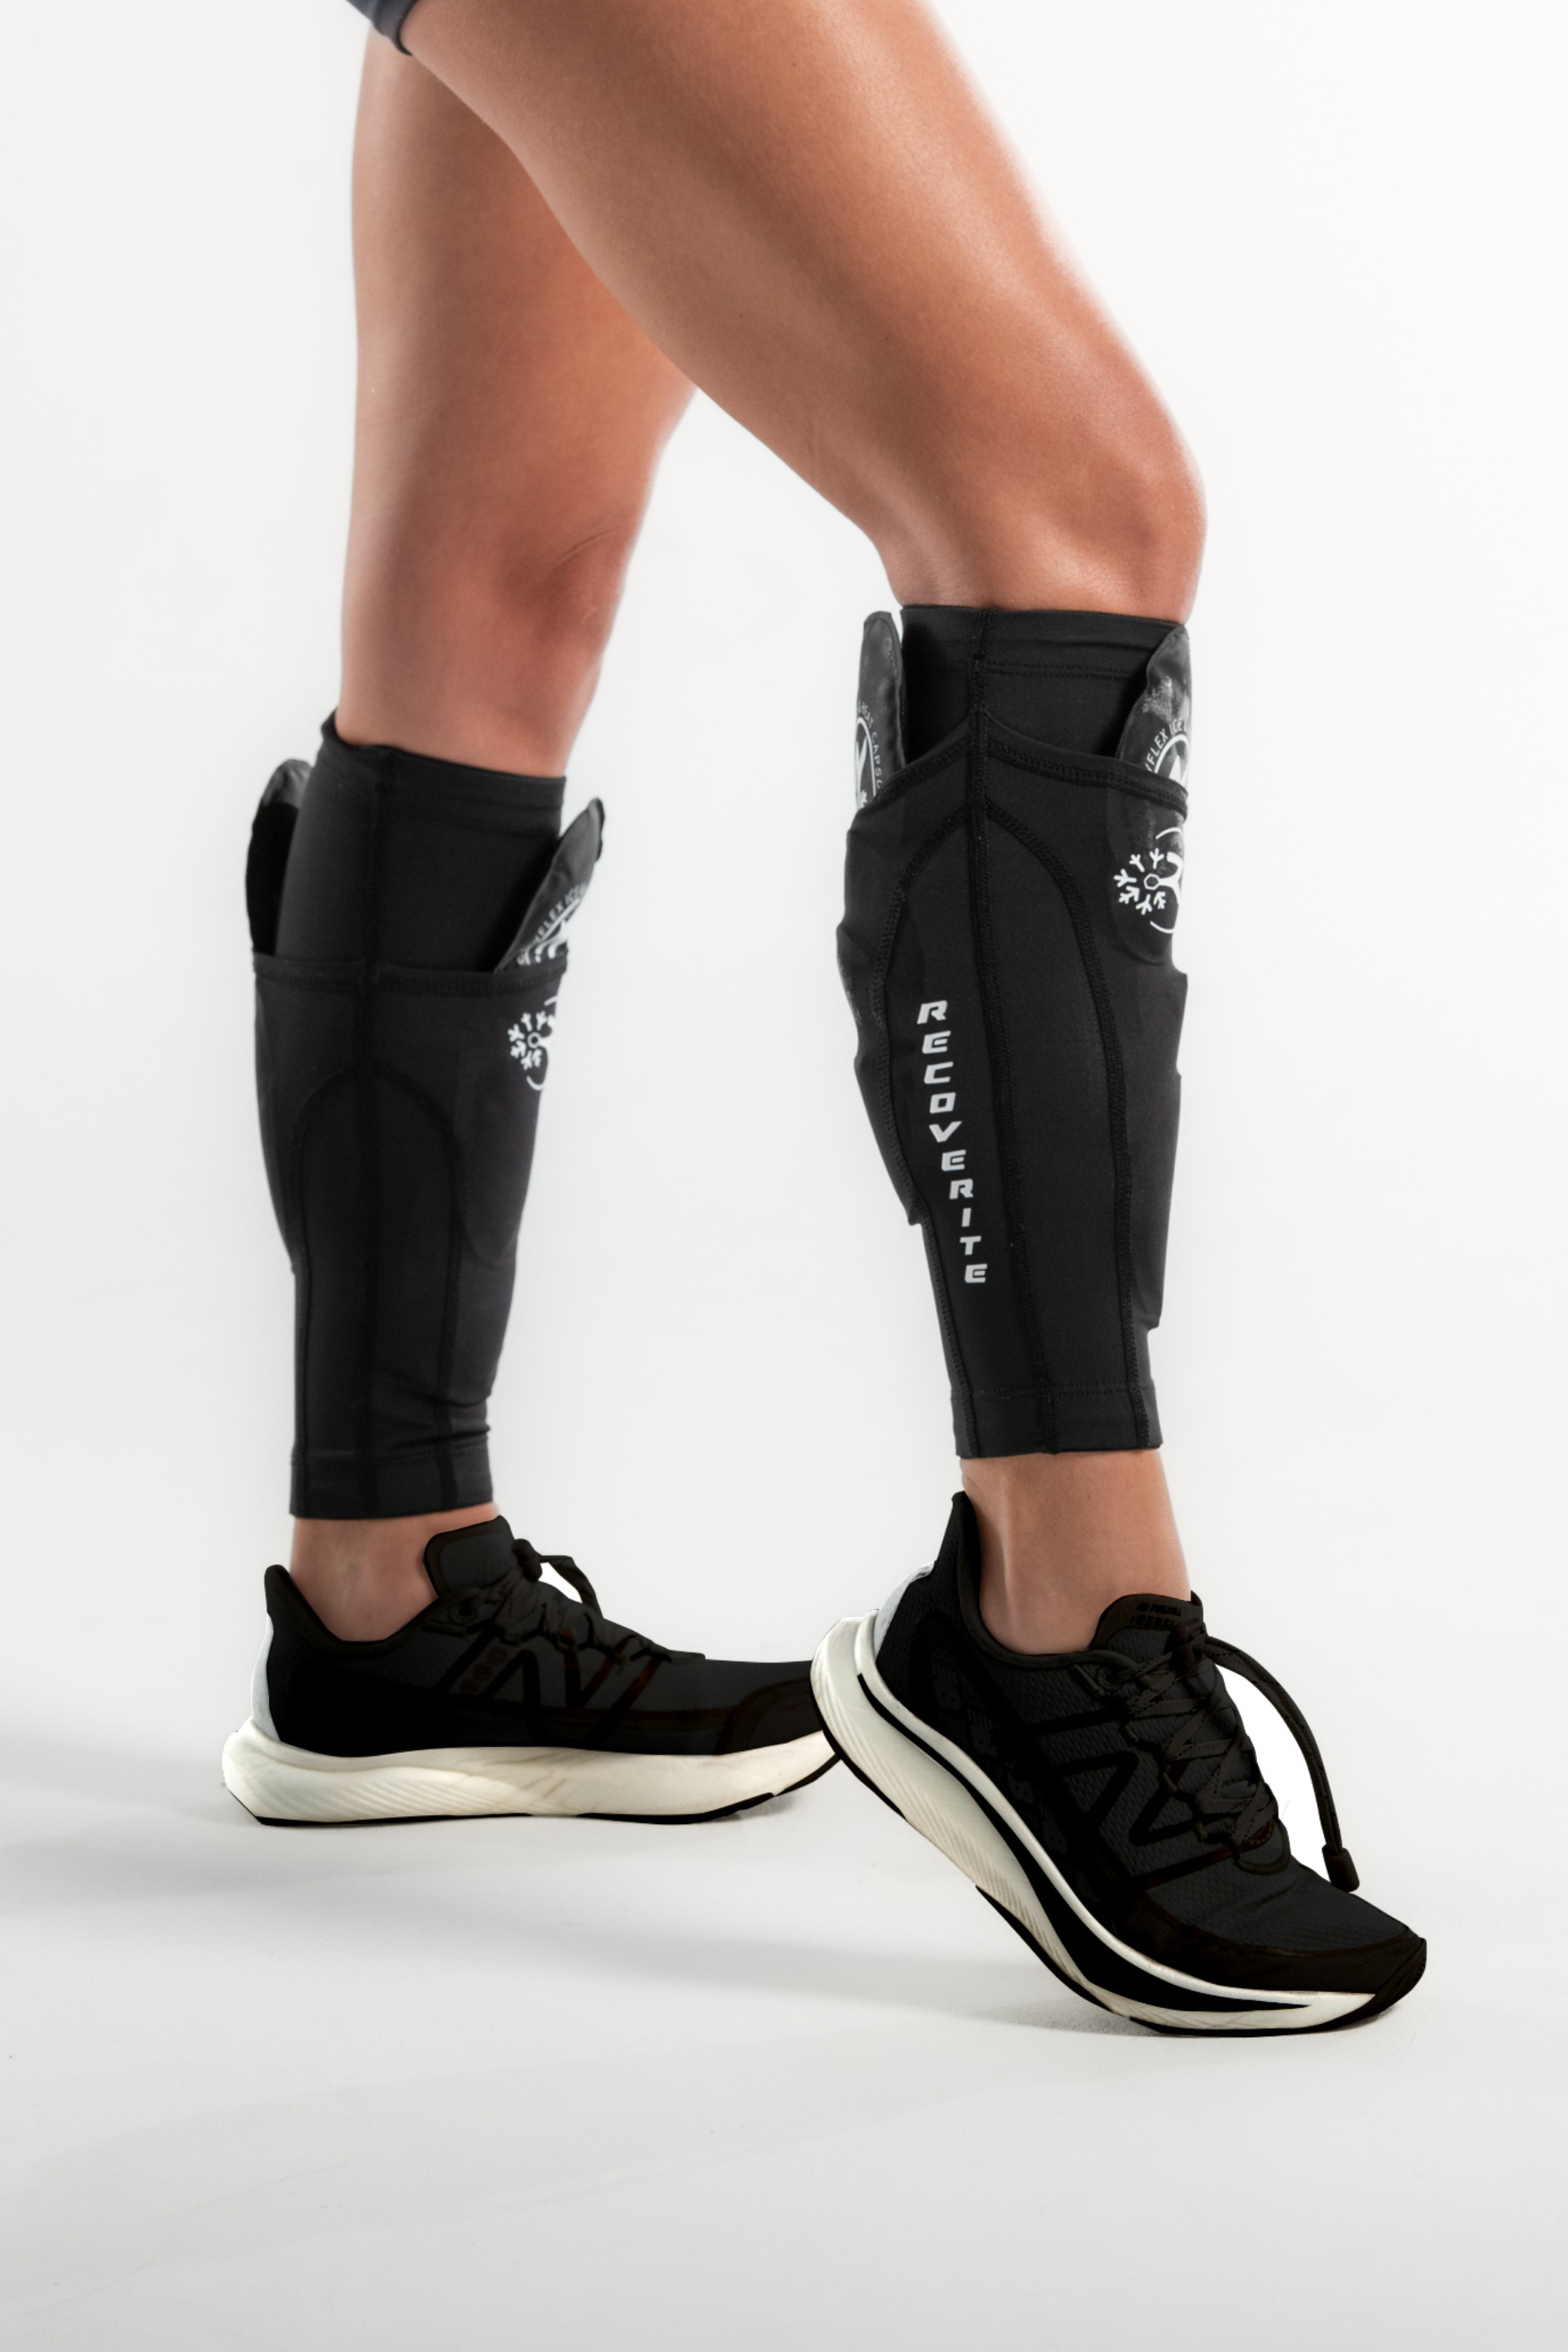 Calf Compression Sleeves with Ice/Heat Packs by Recoverite – Recoverite